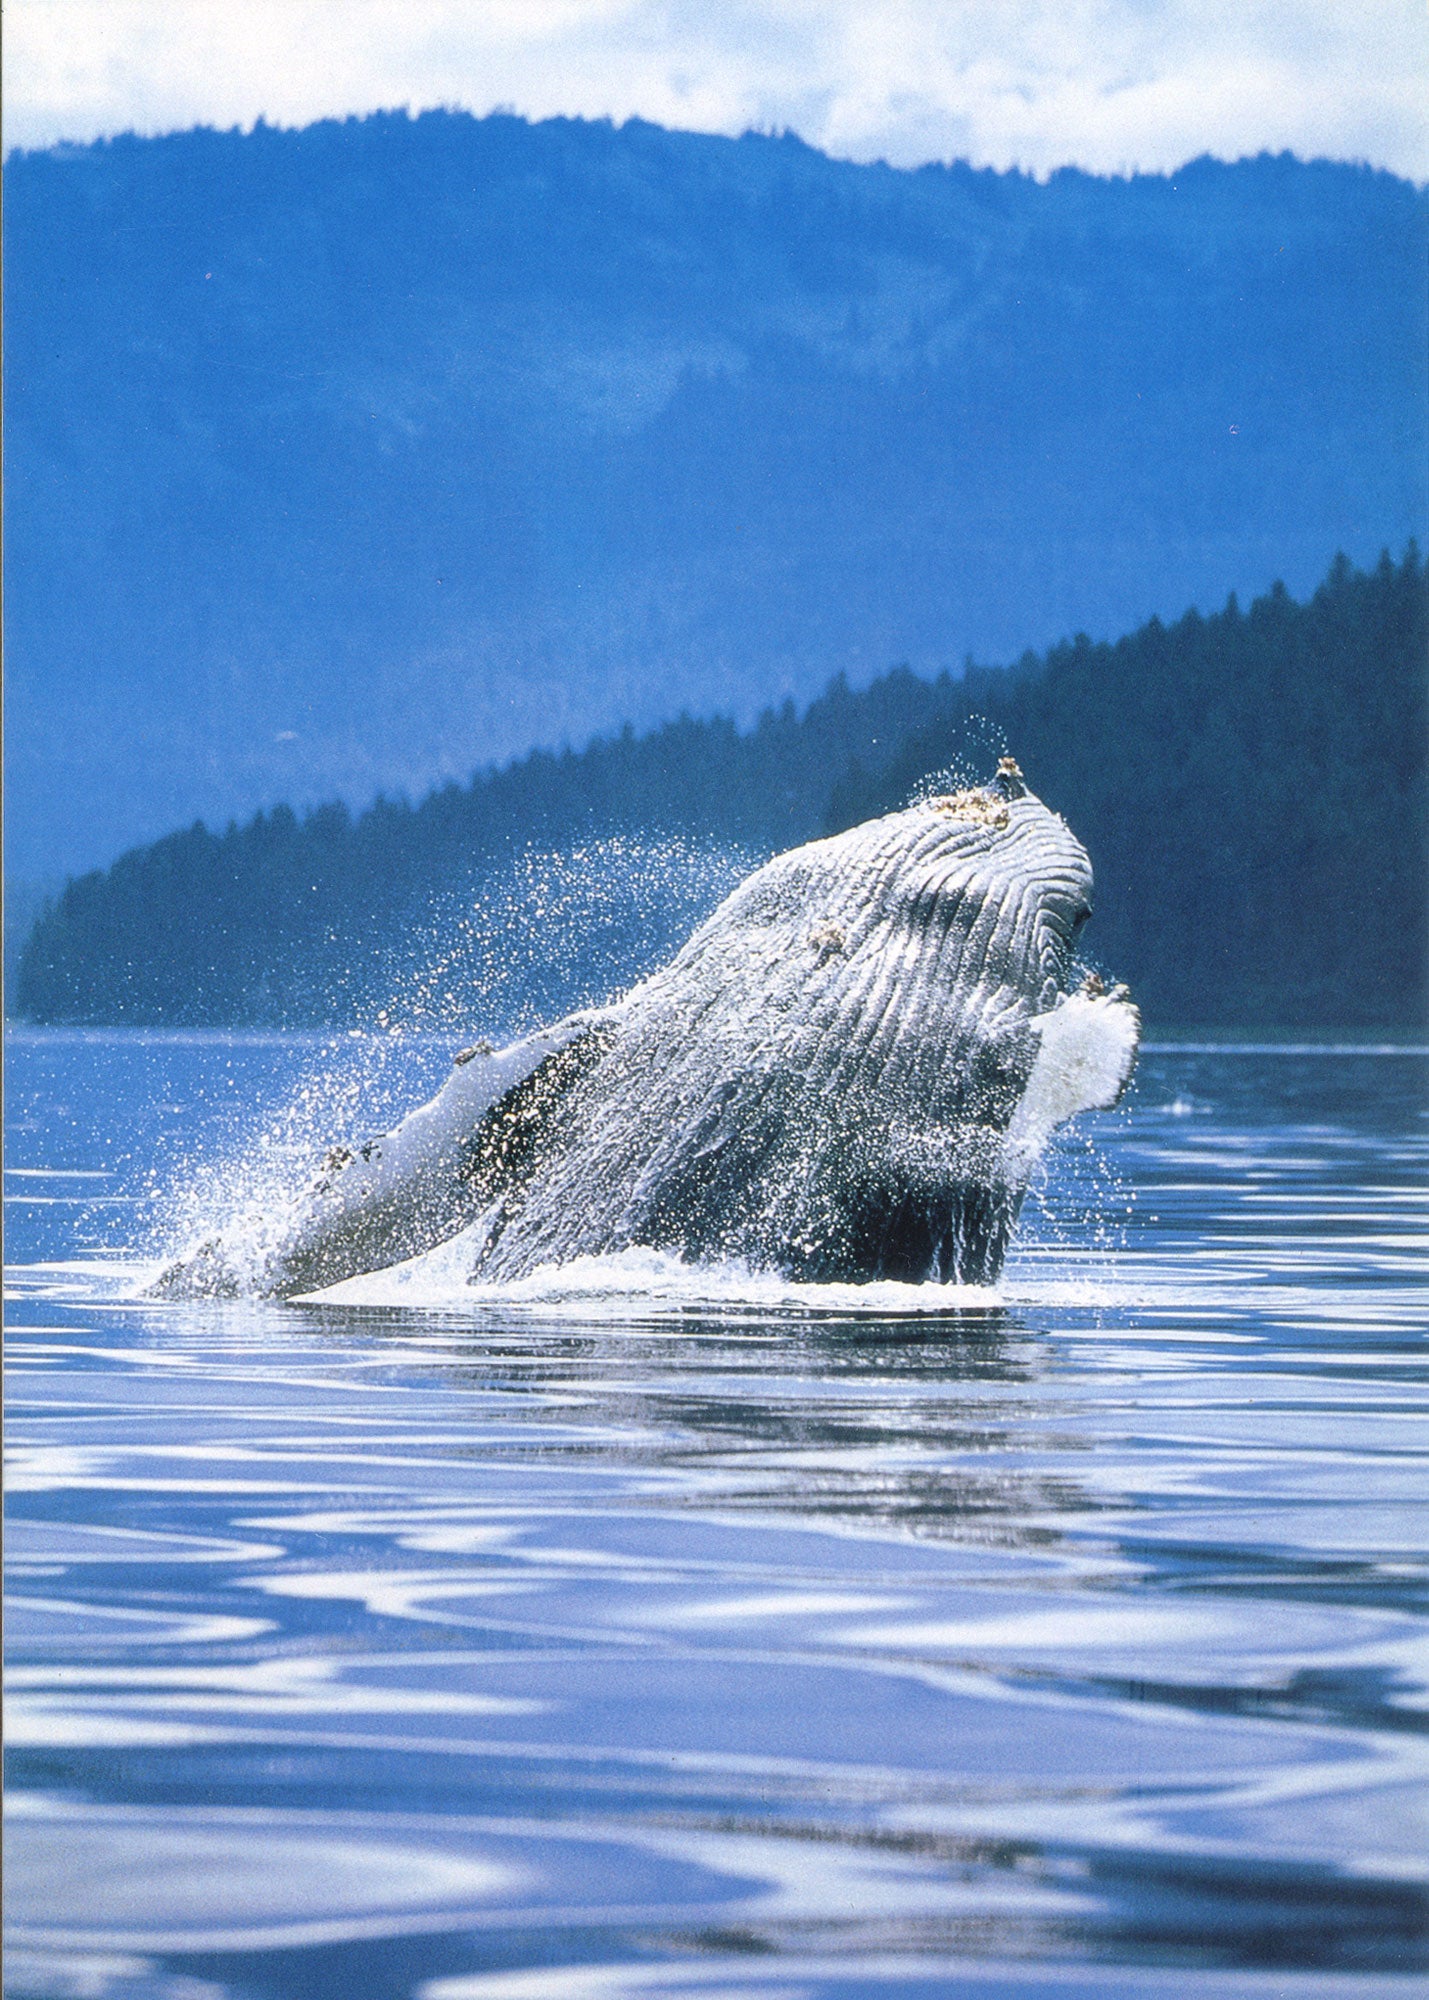 A photo of a whale emerging out of the water. End of image description.